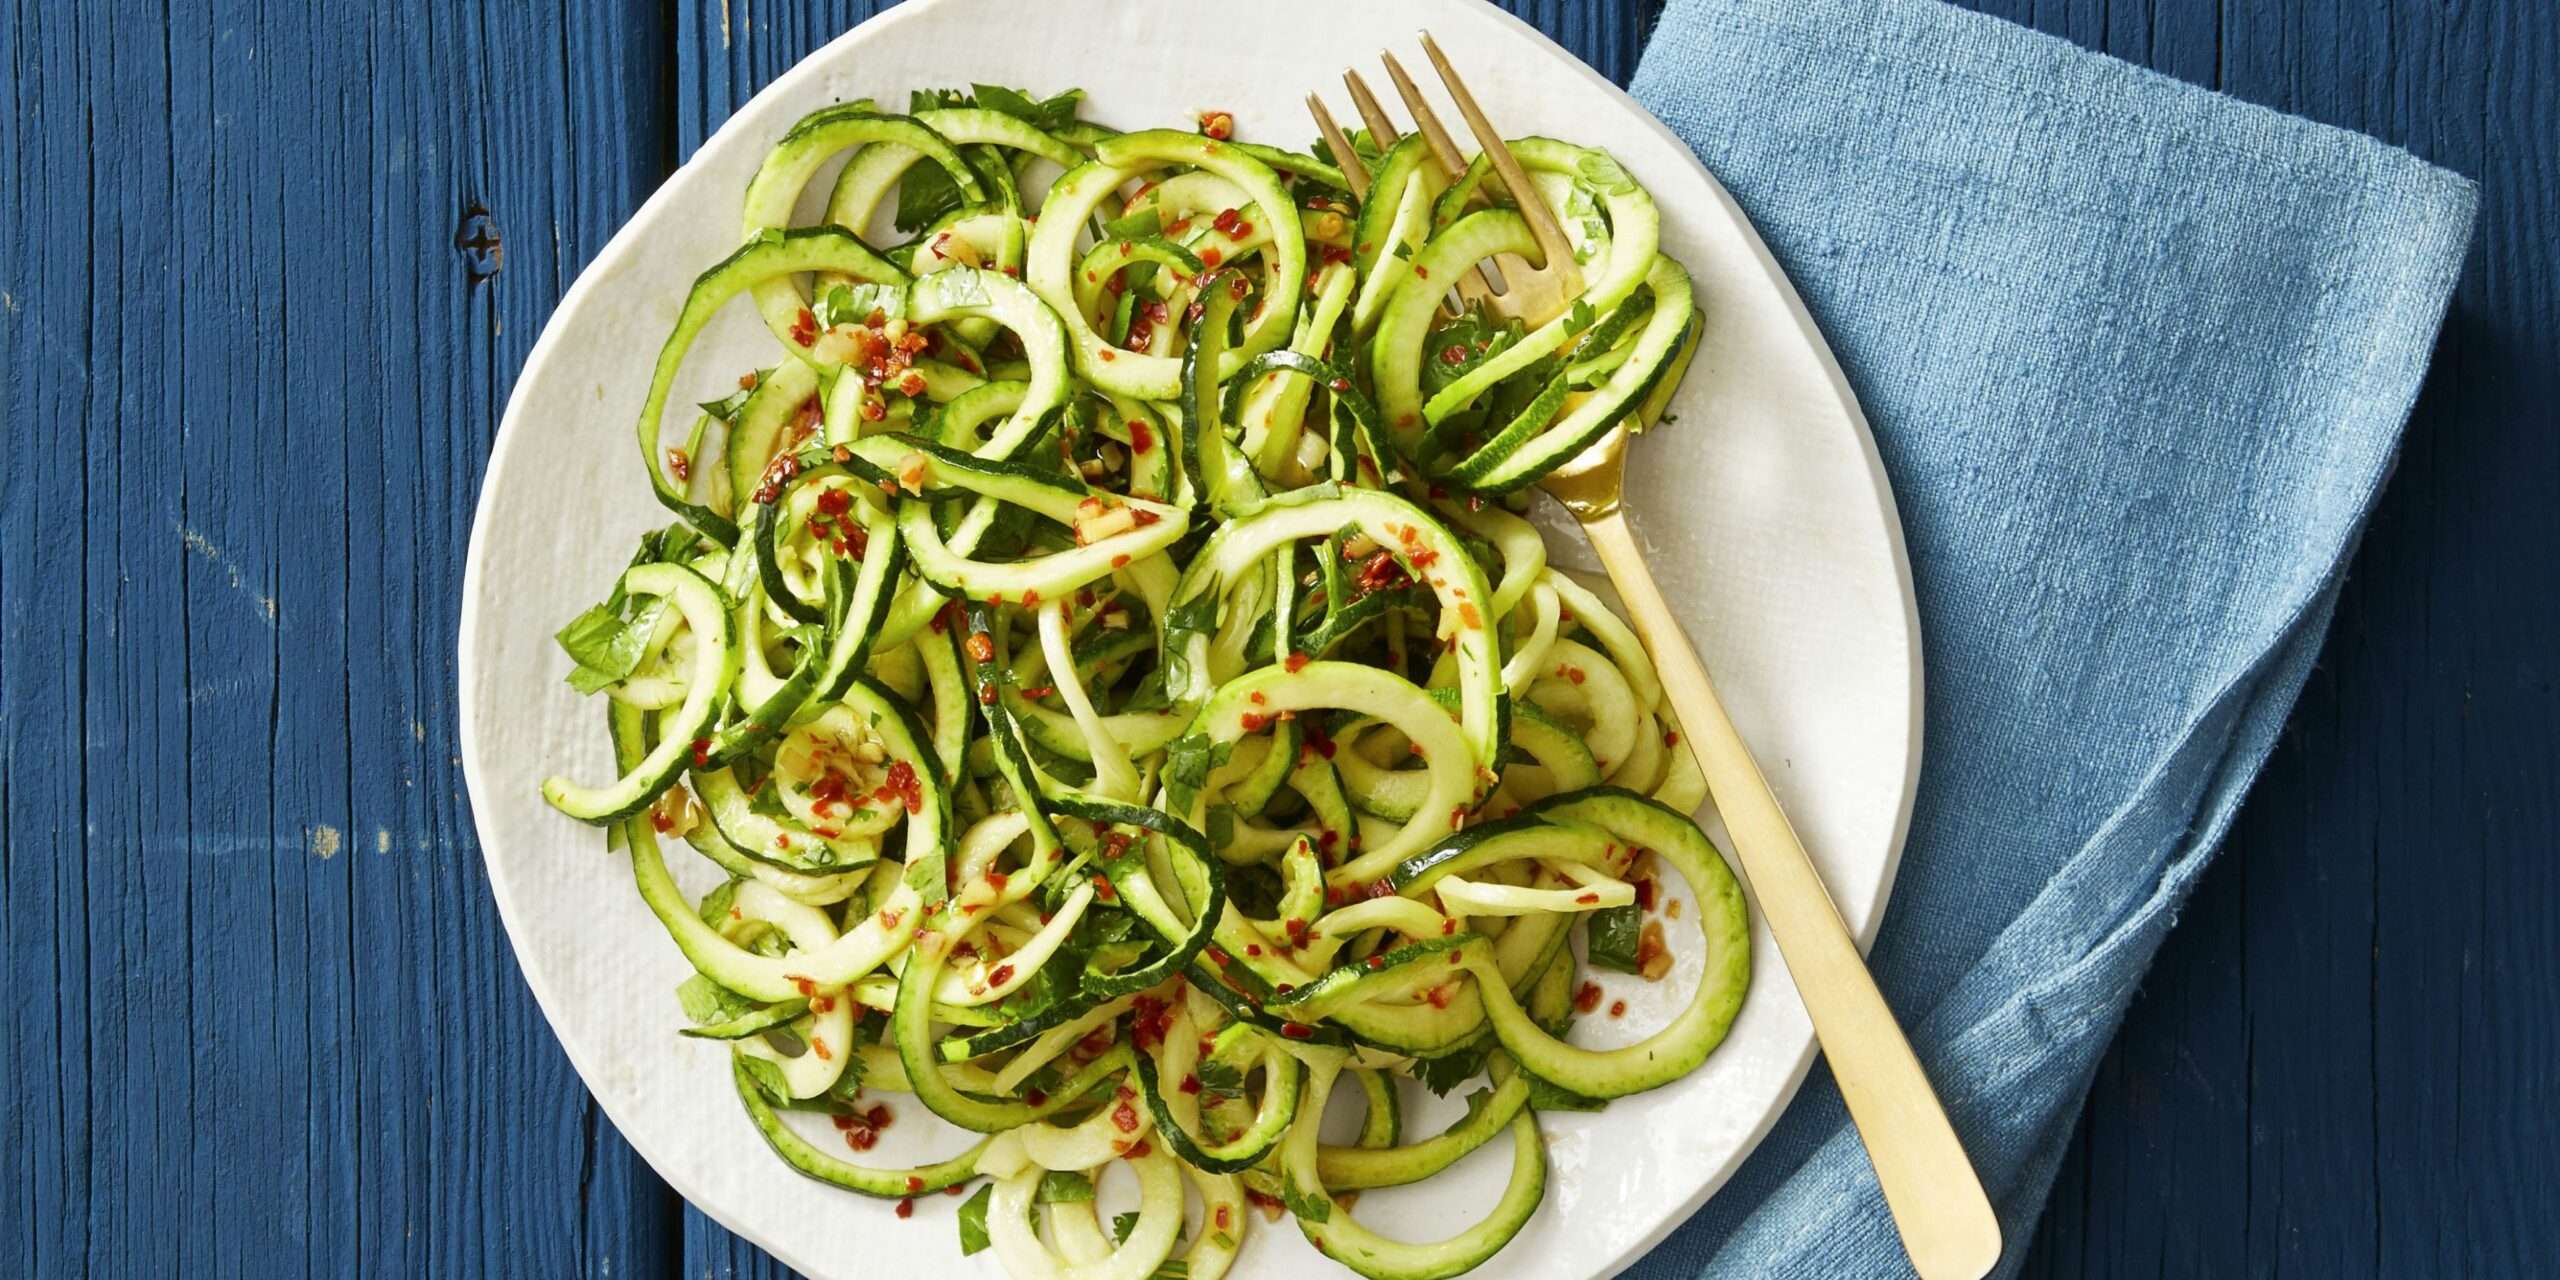 Healthy Zucchini Recipes For Weight